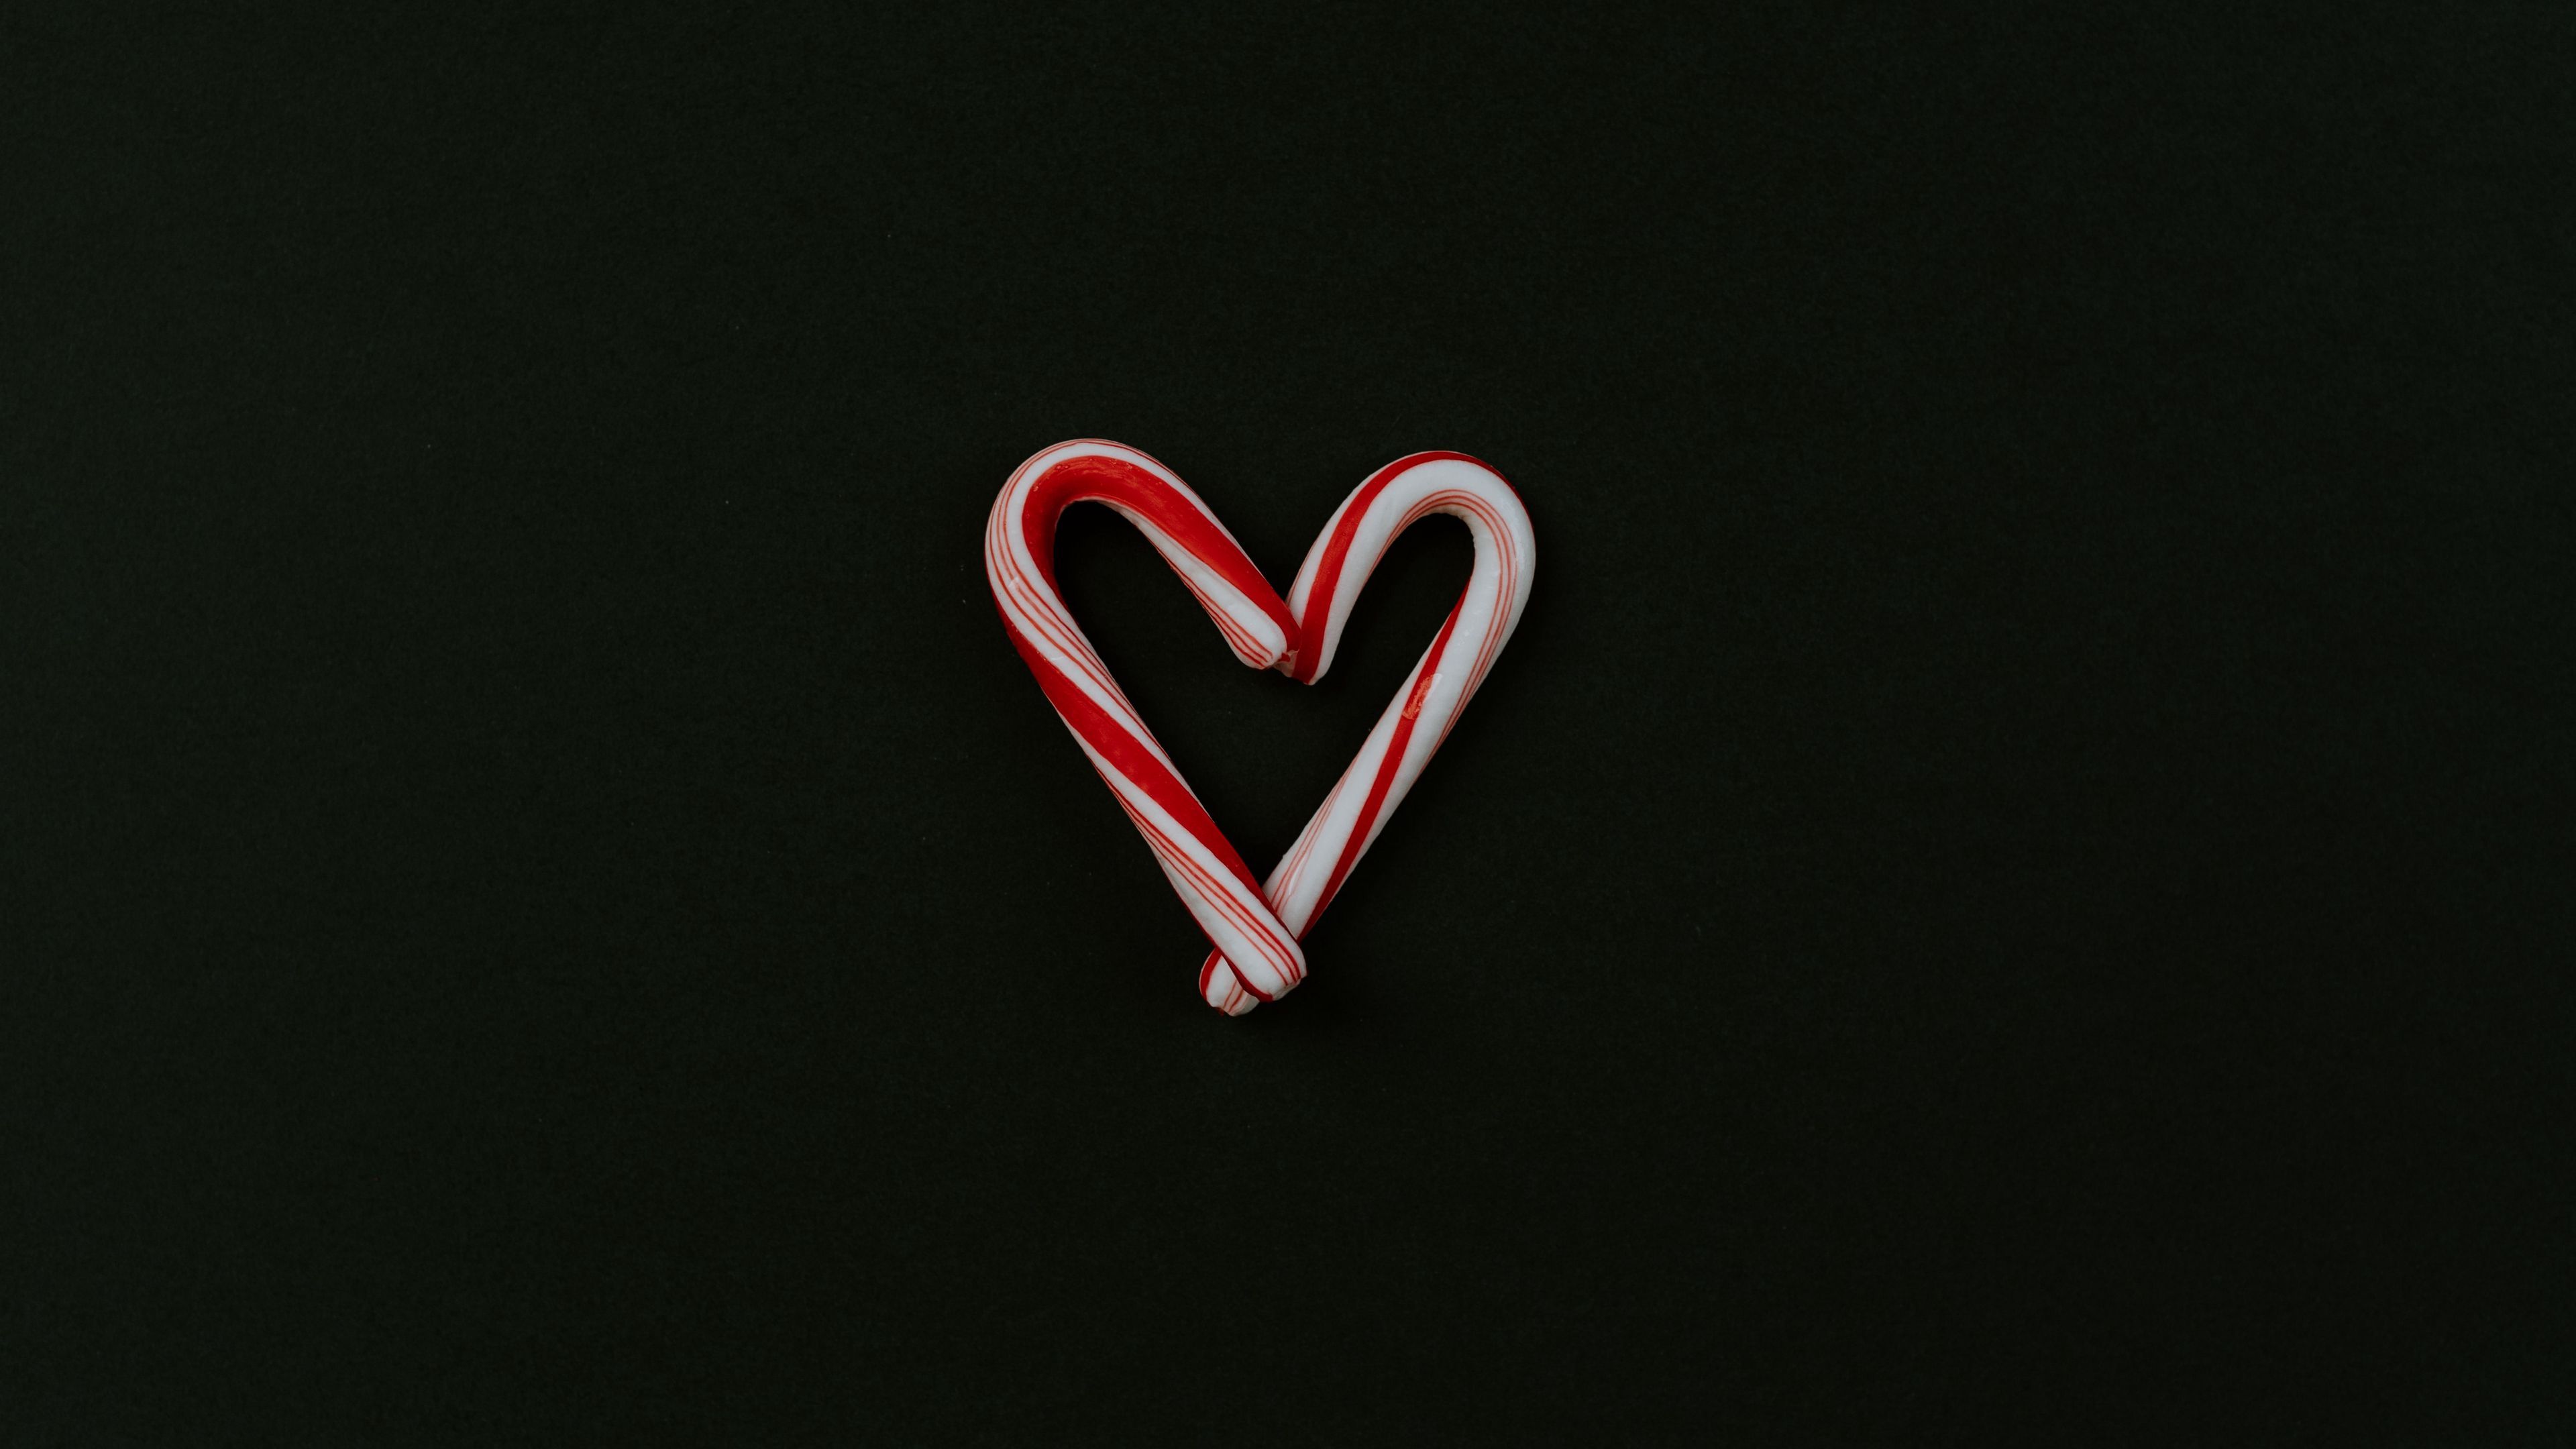 Download wallpaper 3840x2160 candy canes, heart, love, sweet 4k uhd 16:9 HD background